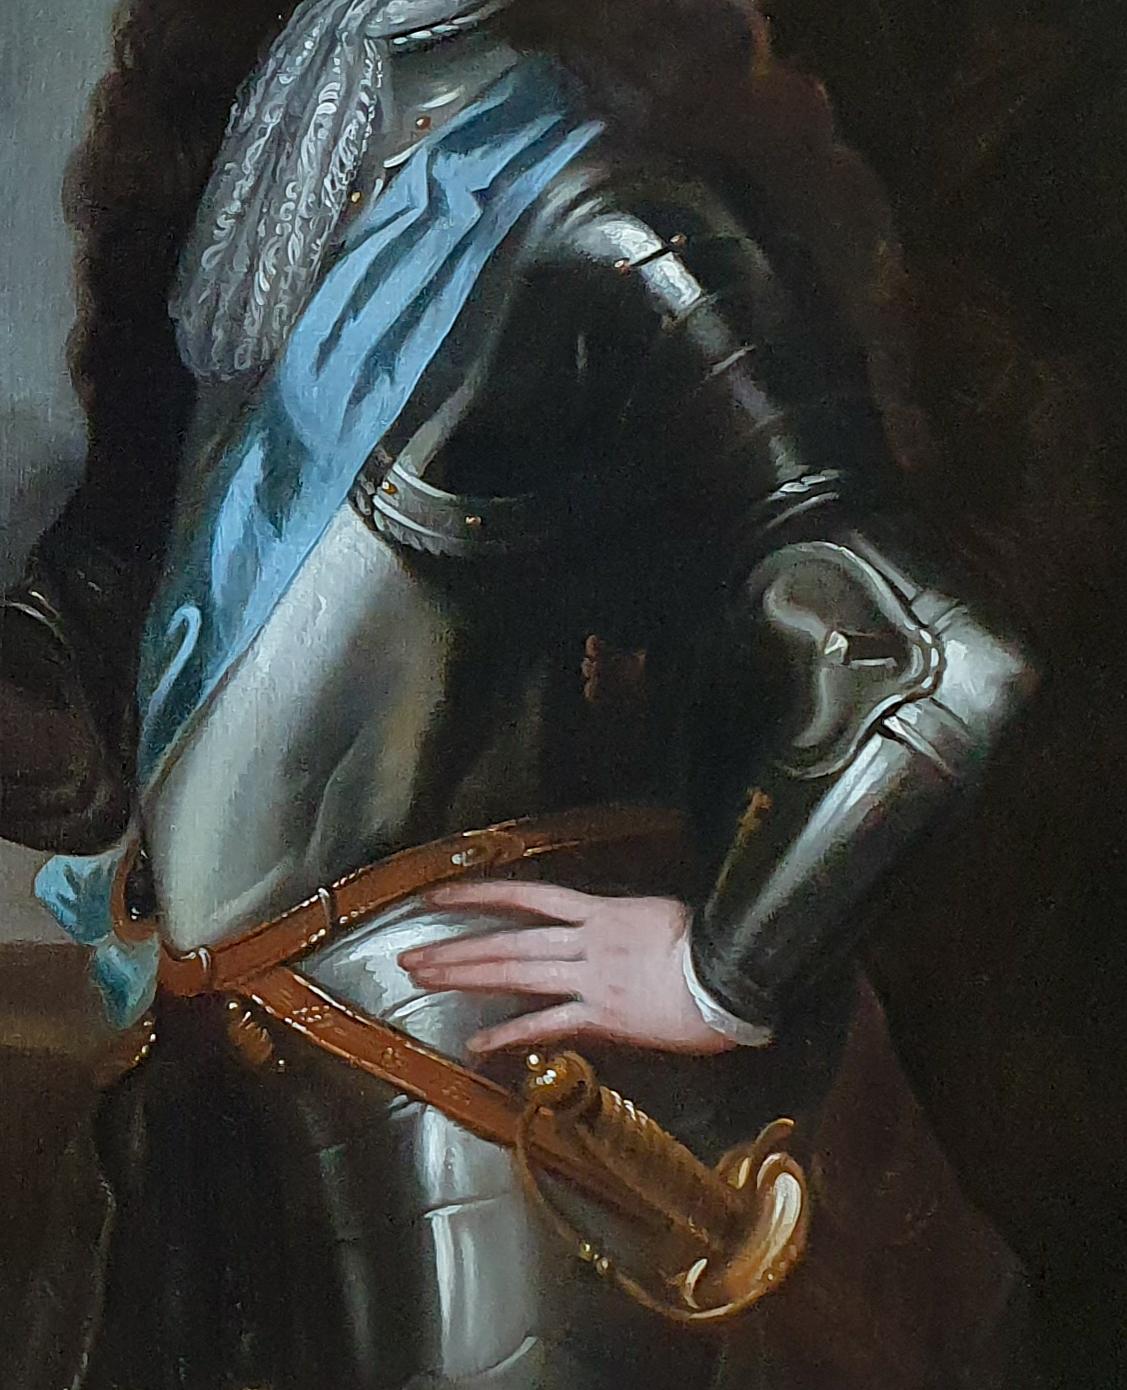 Portrait of King William III circa 1700, Antique Oil on Canvas Painting - Black Portrait Painting by Sir Godfrey Kneller (Studio of)